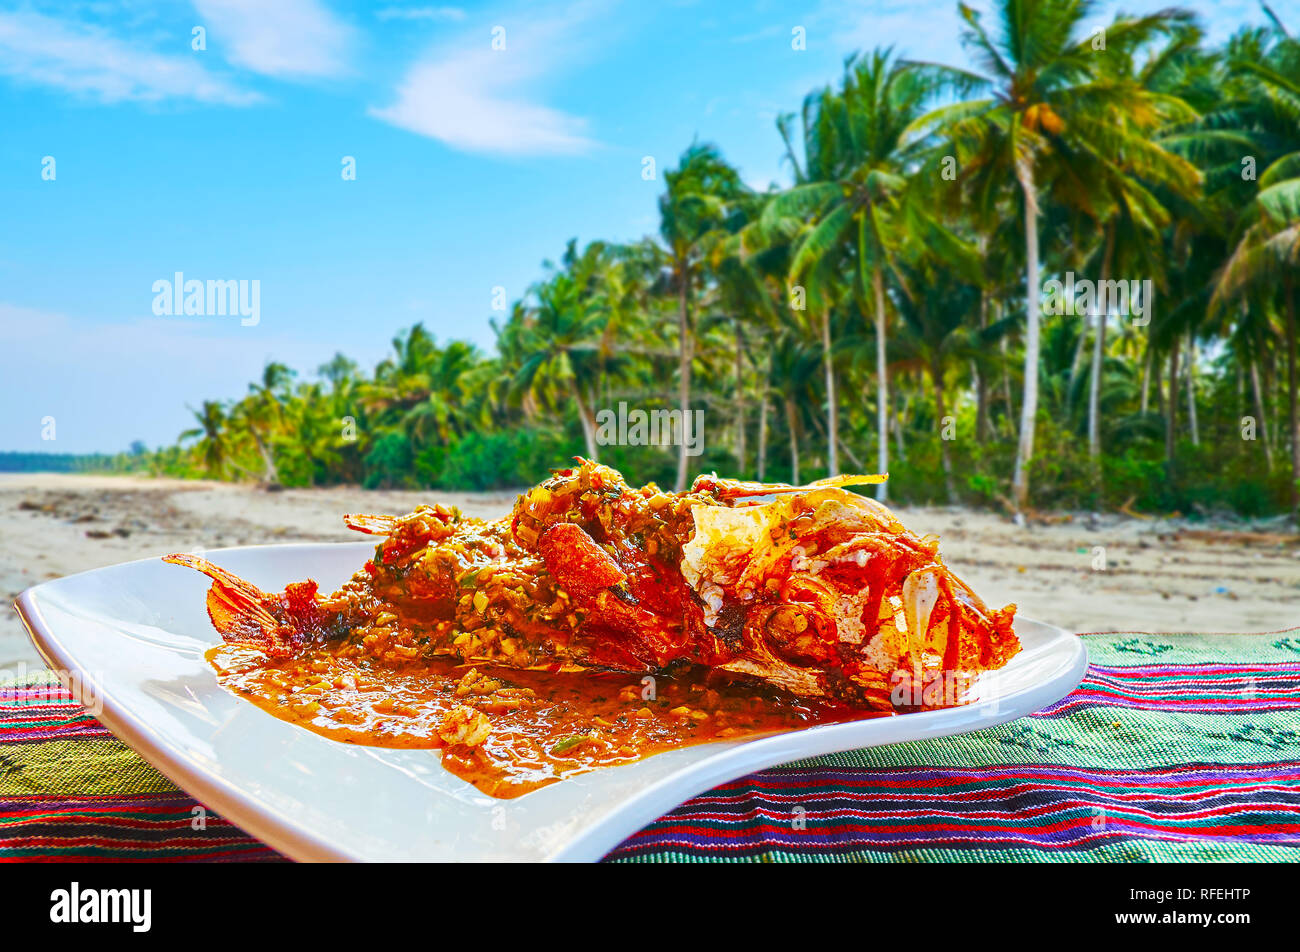 Enjoy Burmese cuisine on the picnic in Chaung Tha resort with local visit card - the fried fish in spicy sauce, vegetables and fragrant herbs, Myanmar Stock Photo